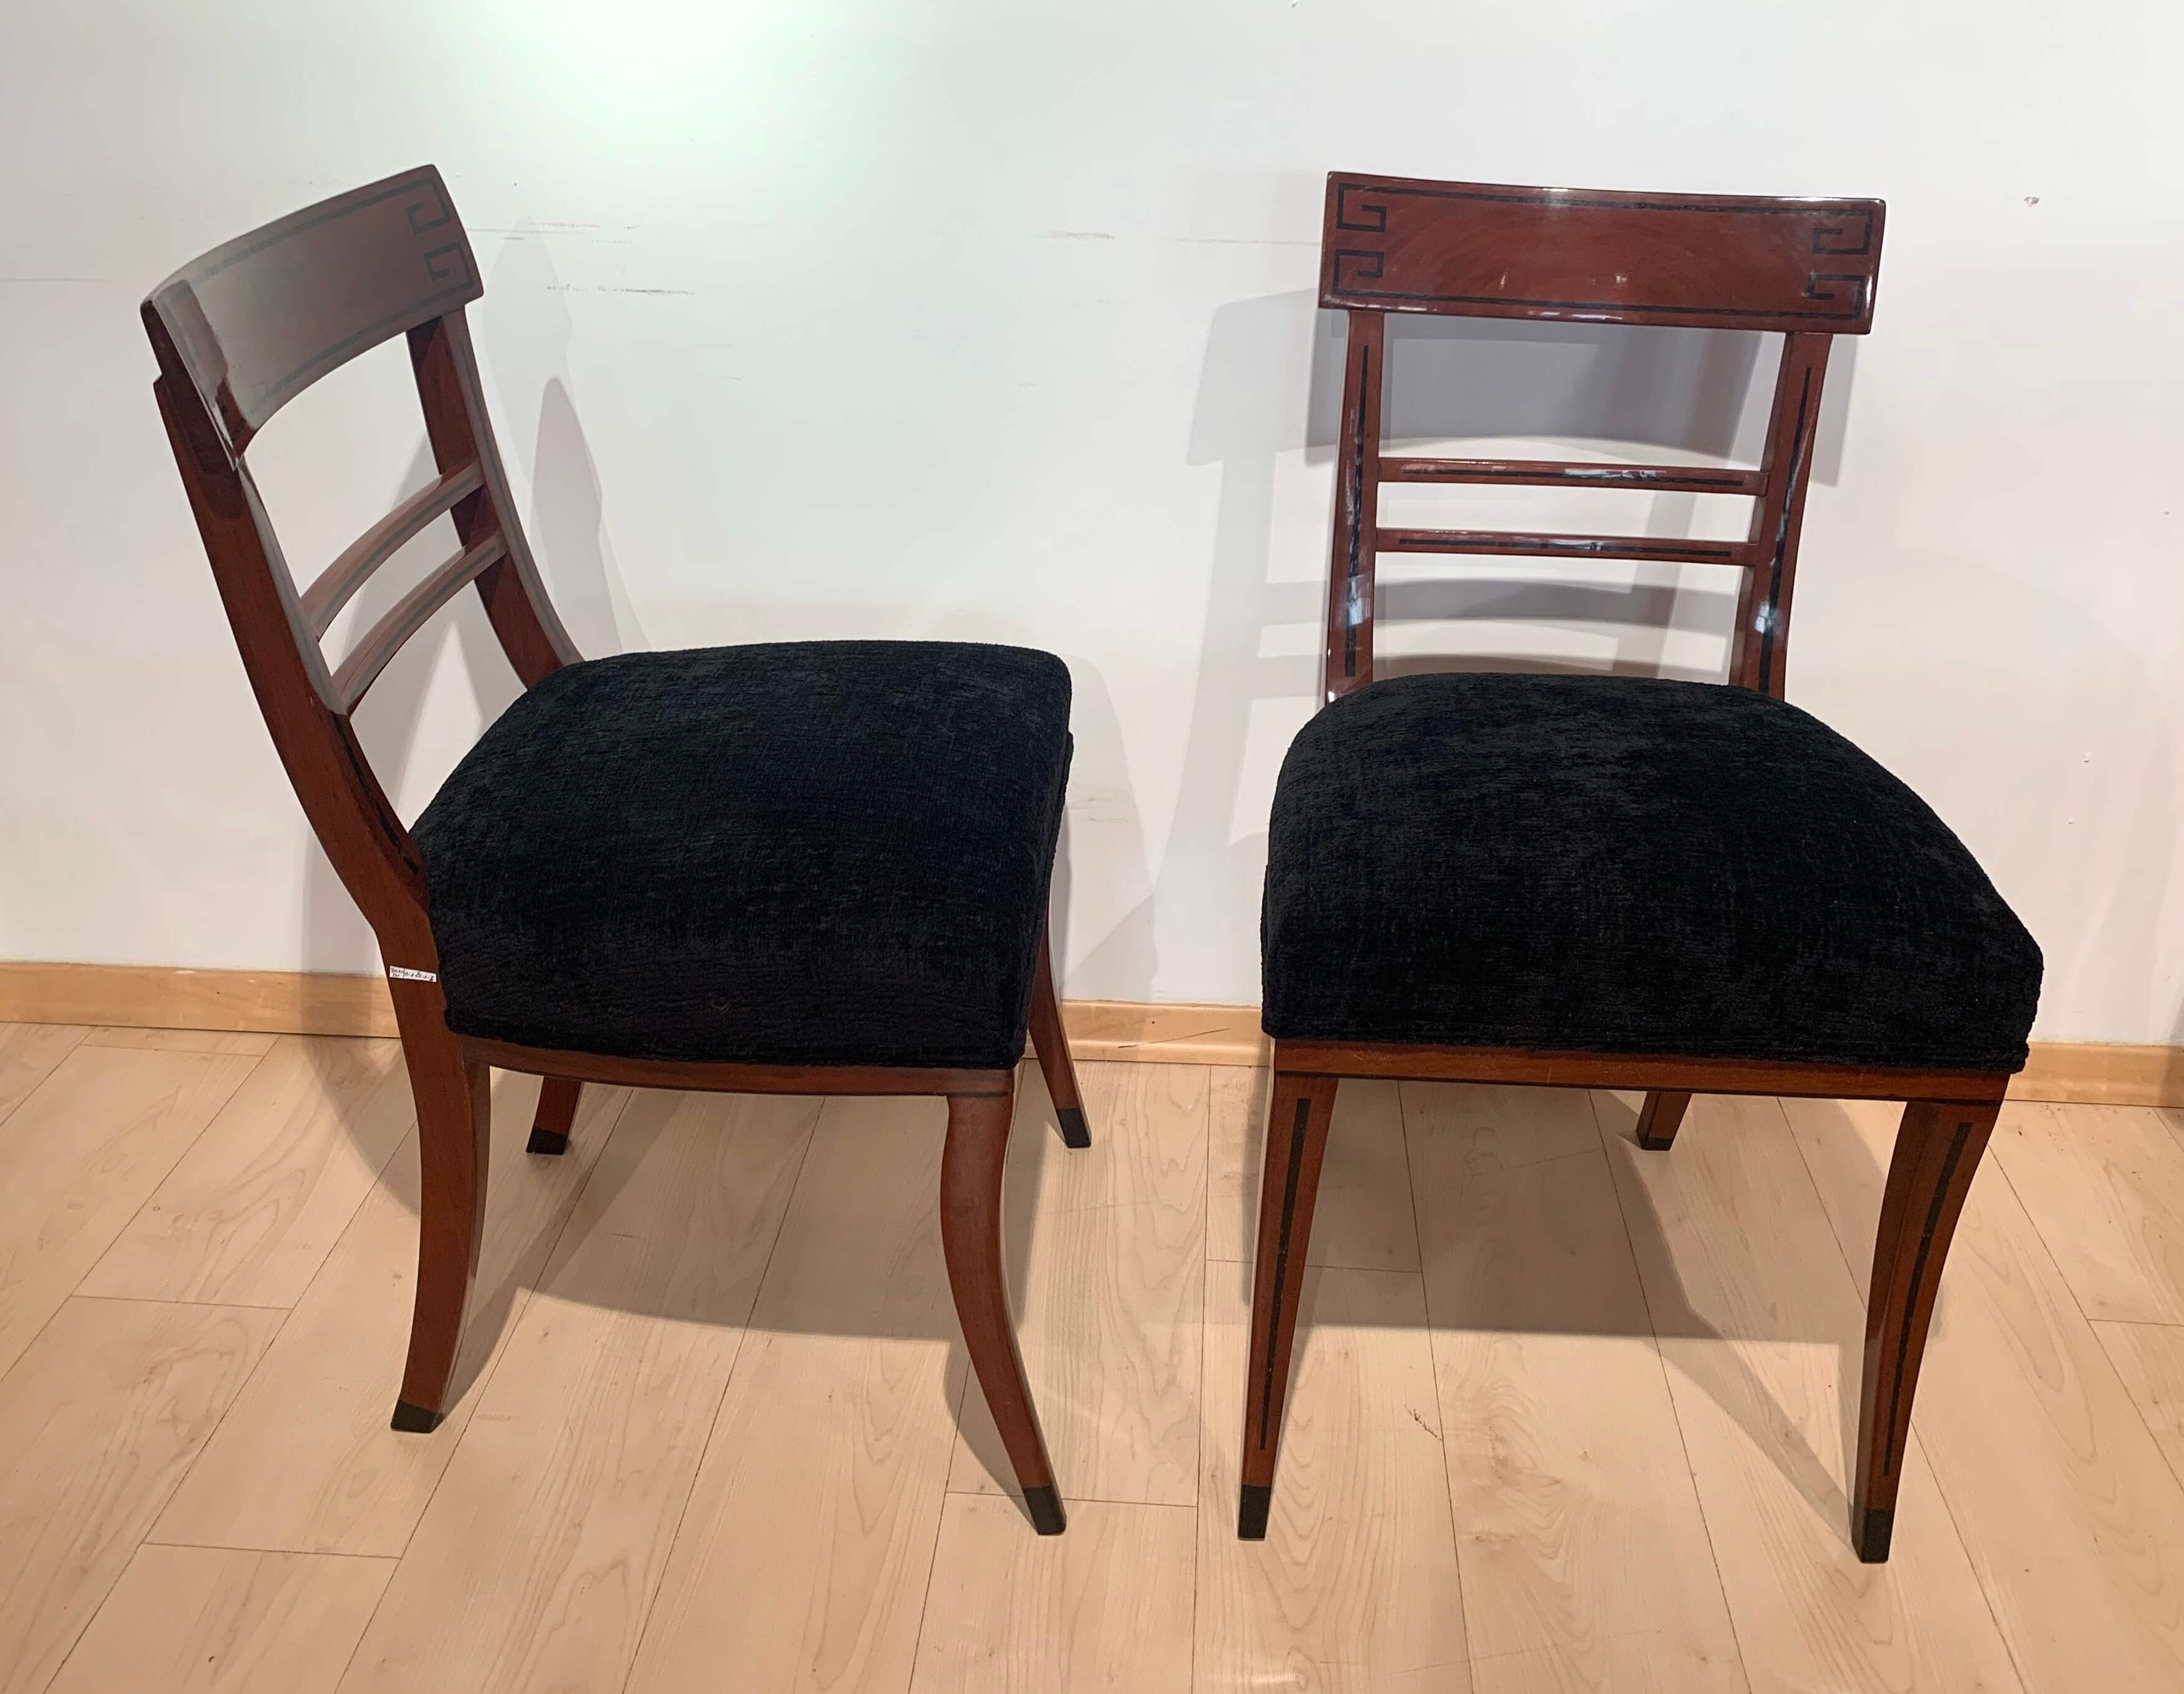 Beautiful neoclassical / early Biedermeier side chairs from Vienna, Austria, circa 1820.
Mahogany solid wood with ebony inlays. Hand polished with shellac (french polished.
Newly upholstered with black structured velvet and double keder.
 
2